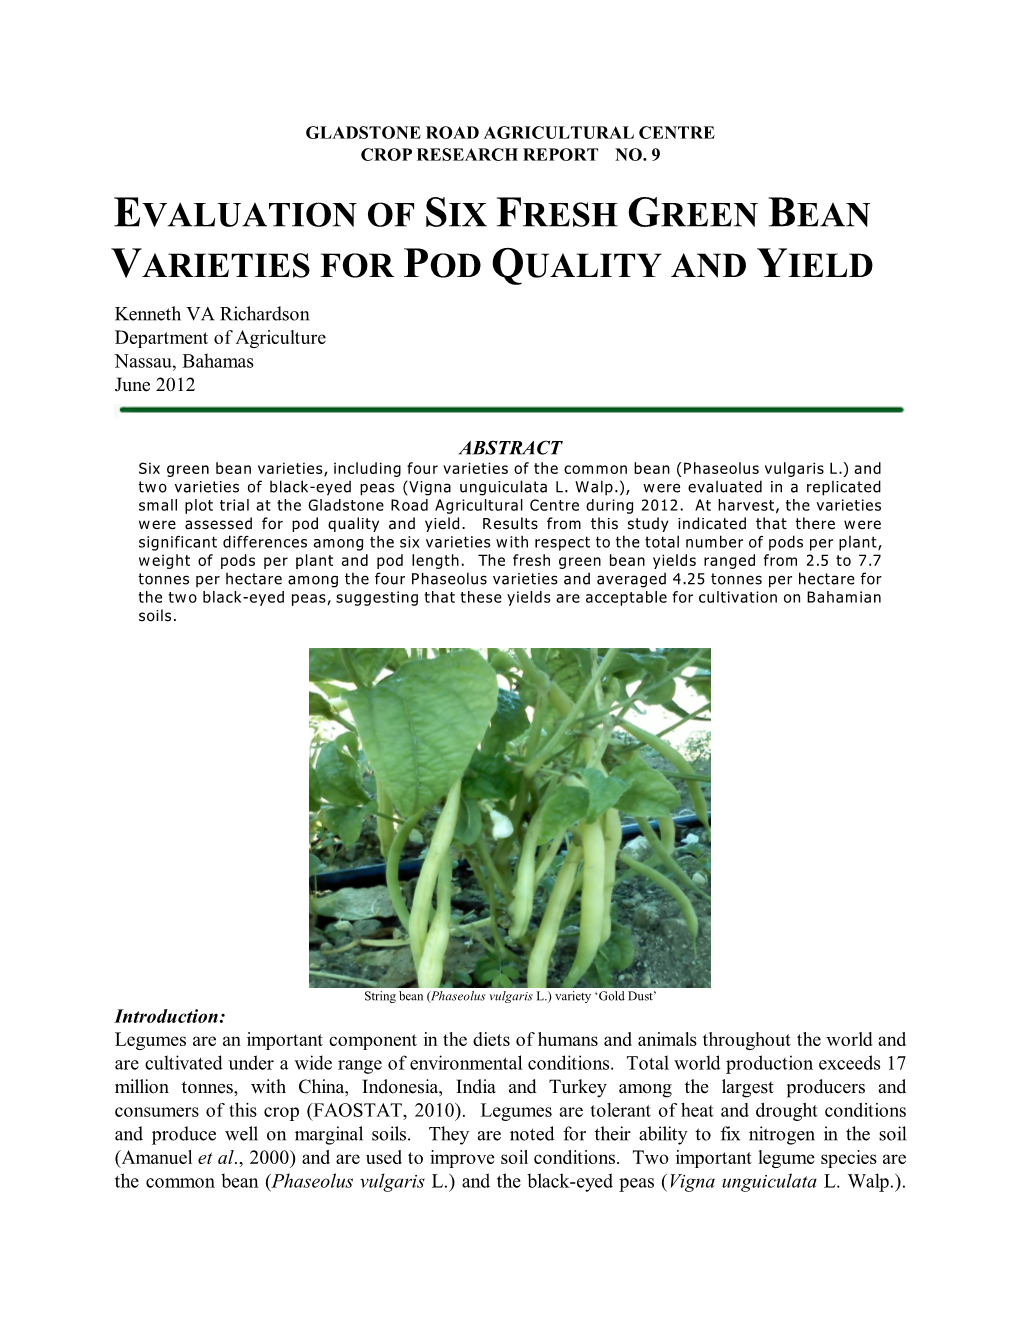 Evaluation of Six Fresh Green Bean Varieties for Pod Quality and Yield